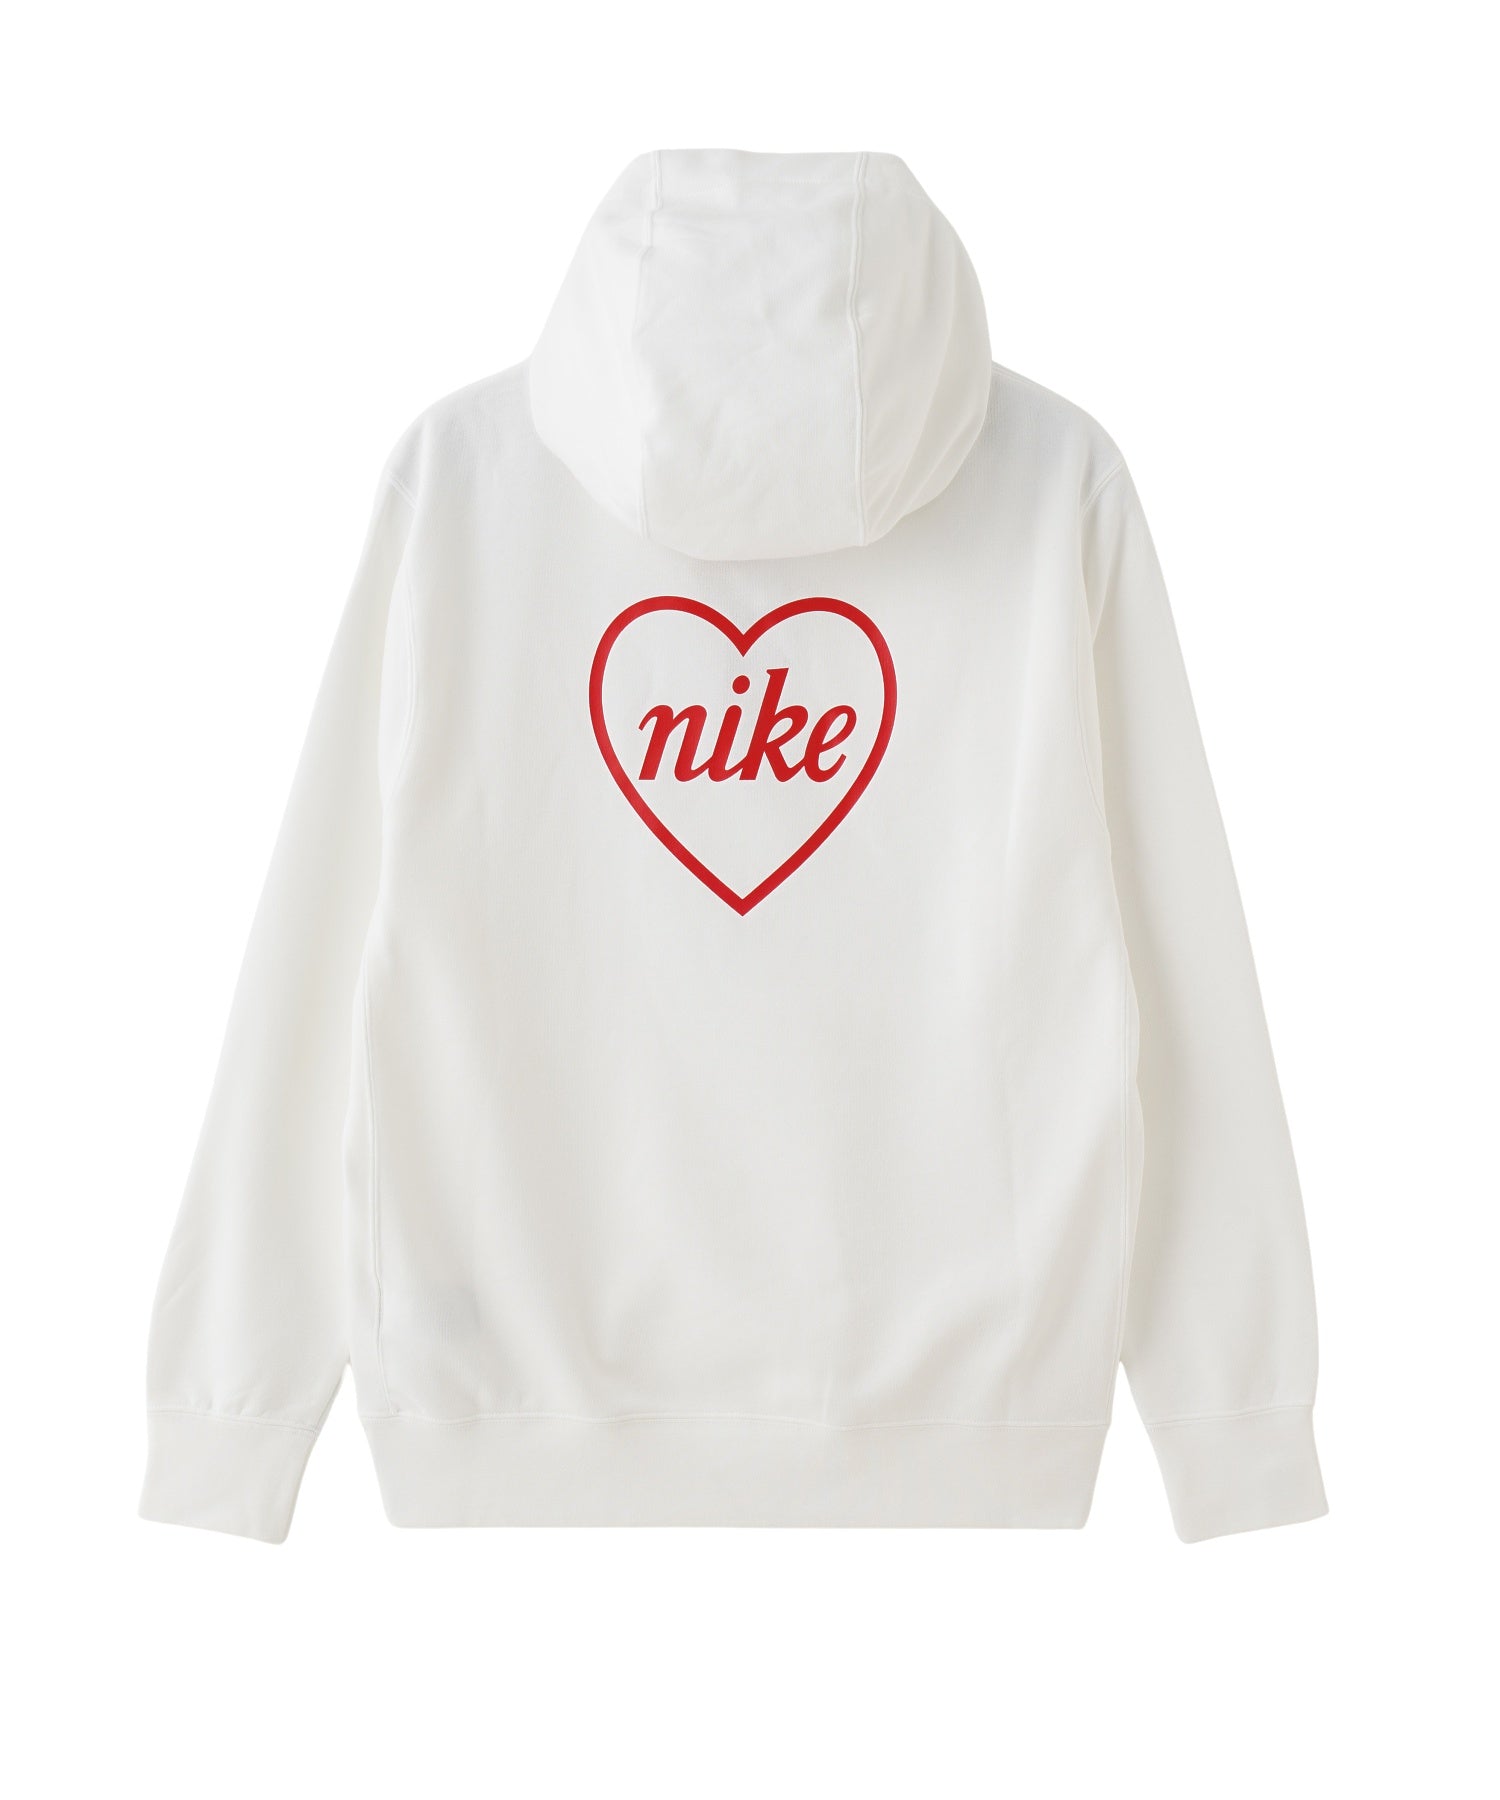 NIKE/ナイキ/NSW FT XVDAY PULLOVER L/S HOODIE/FZ5201